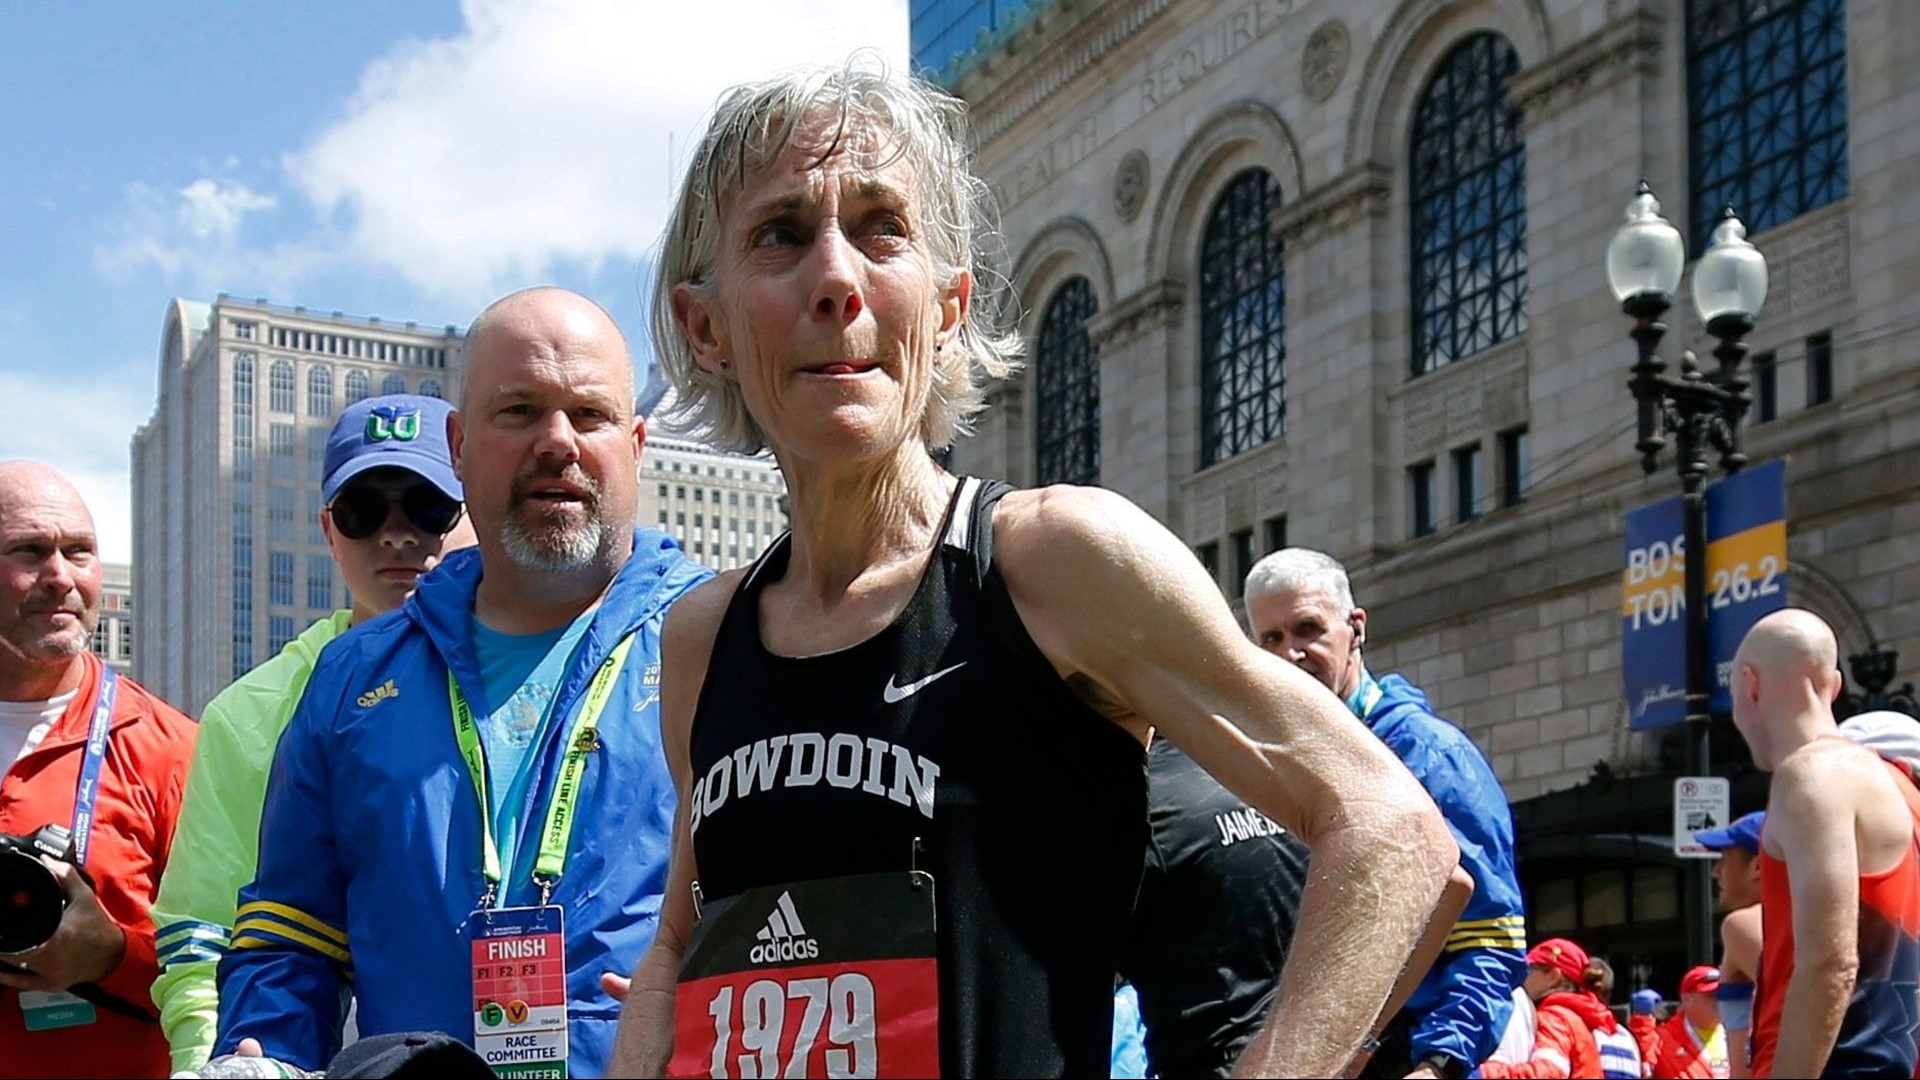 The 61-year-old ran the Boston Marathon 40 years after her record-breaking win in 1979.